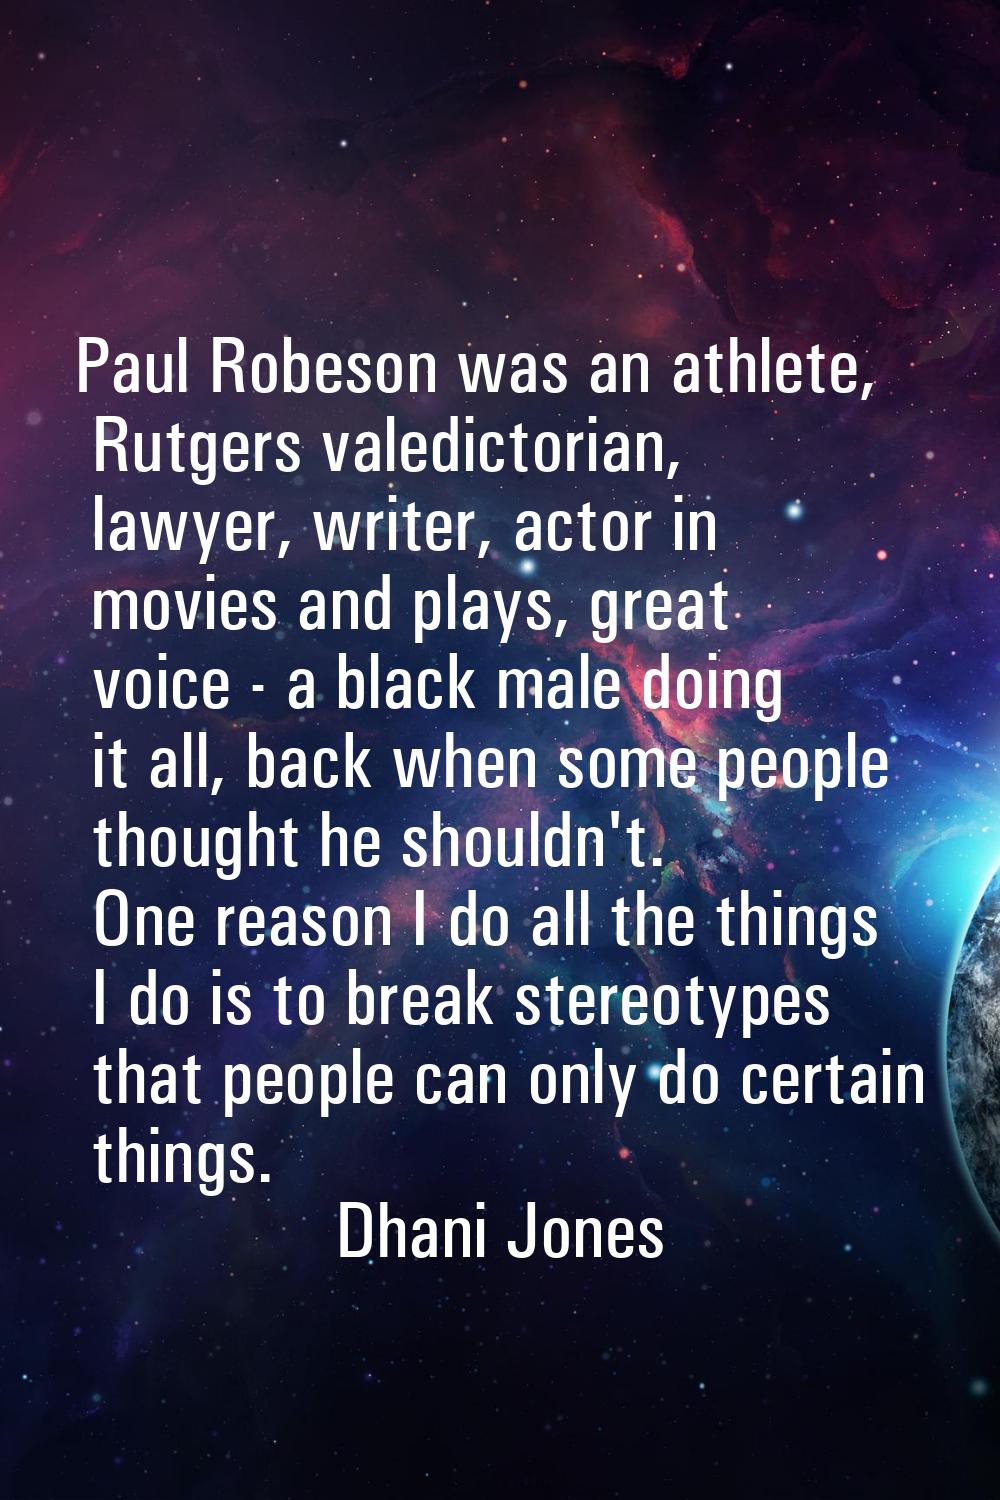 Paul Robeson was an athlete, Rutgers valedictorian, lawyer, writer, actor in movies and plays, grea